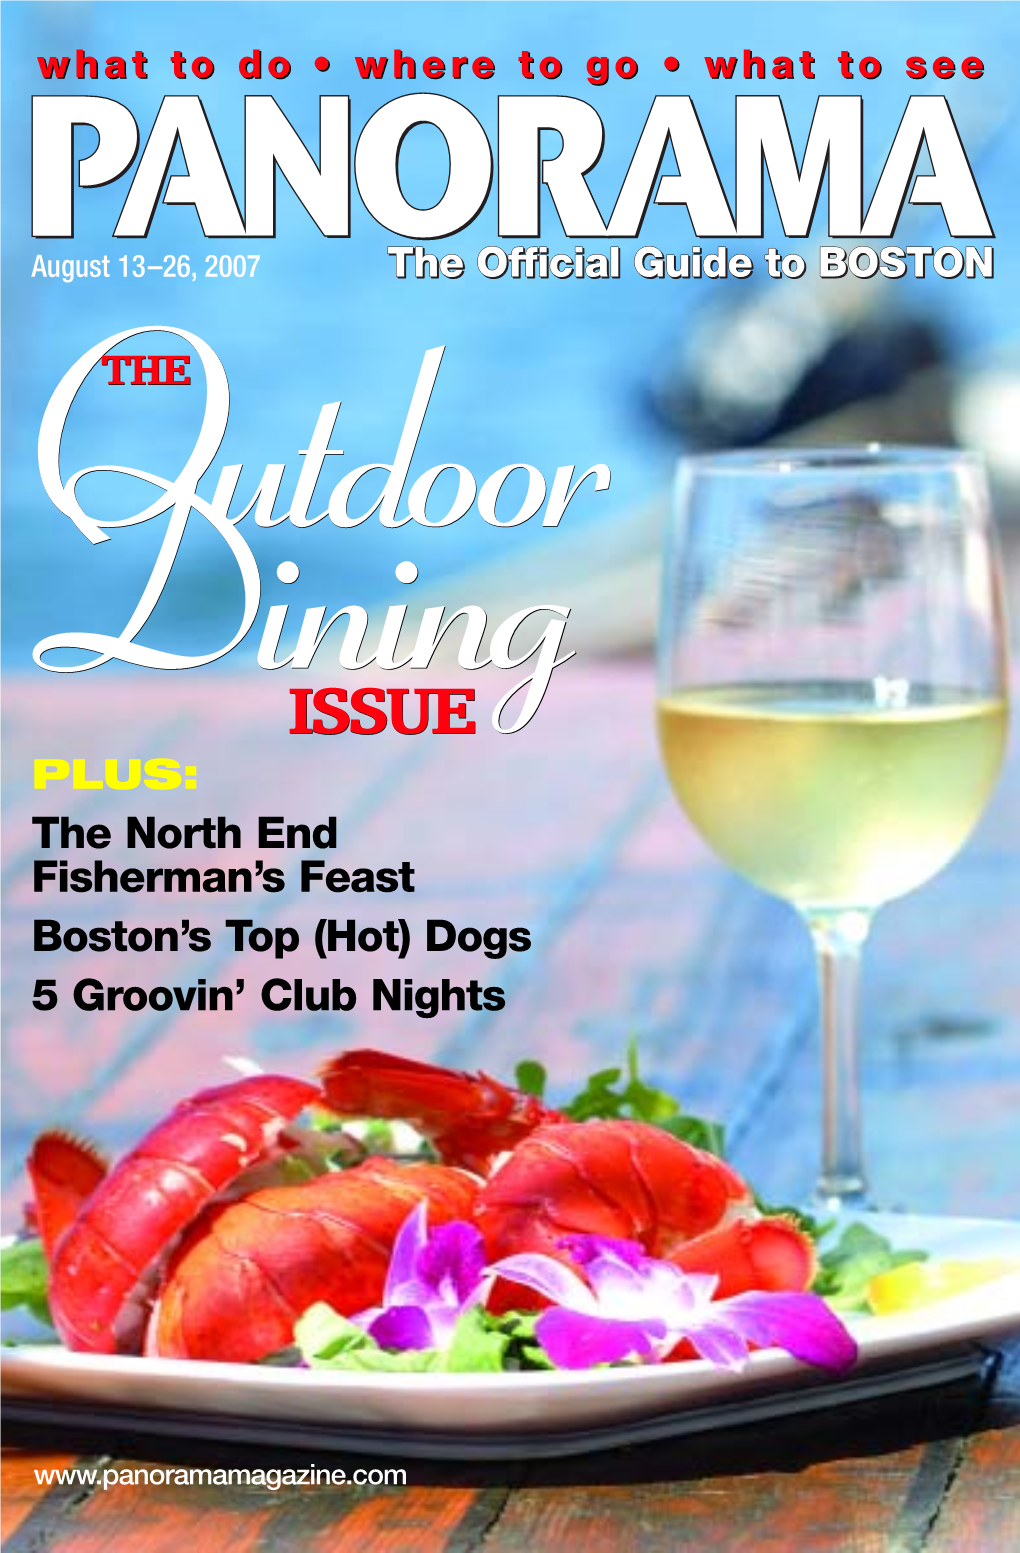 Diningining ISSUE PLUS: the North End Fisherman’S Feast Boston’S Top (Hot) Dogs 5 Groovin’ Club Nights